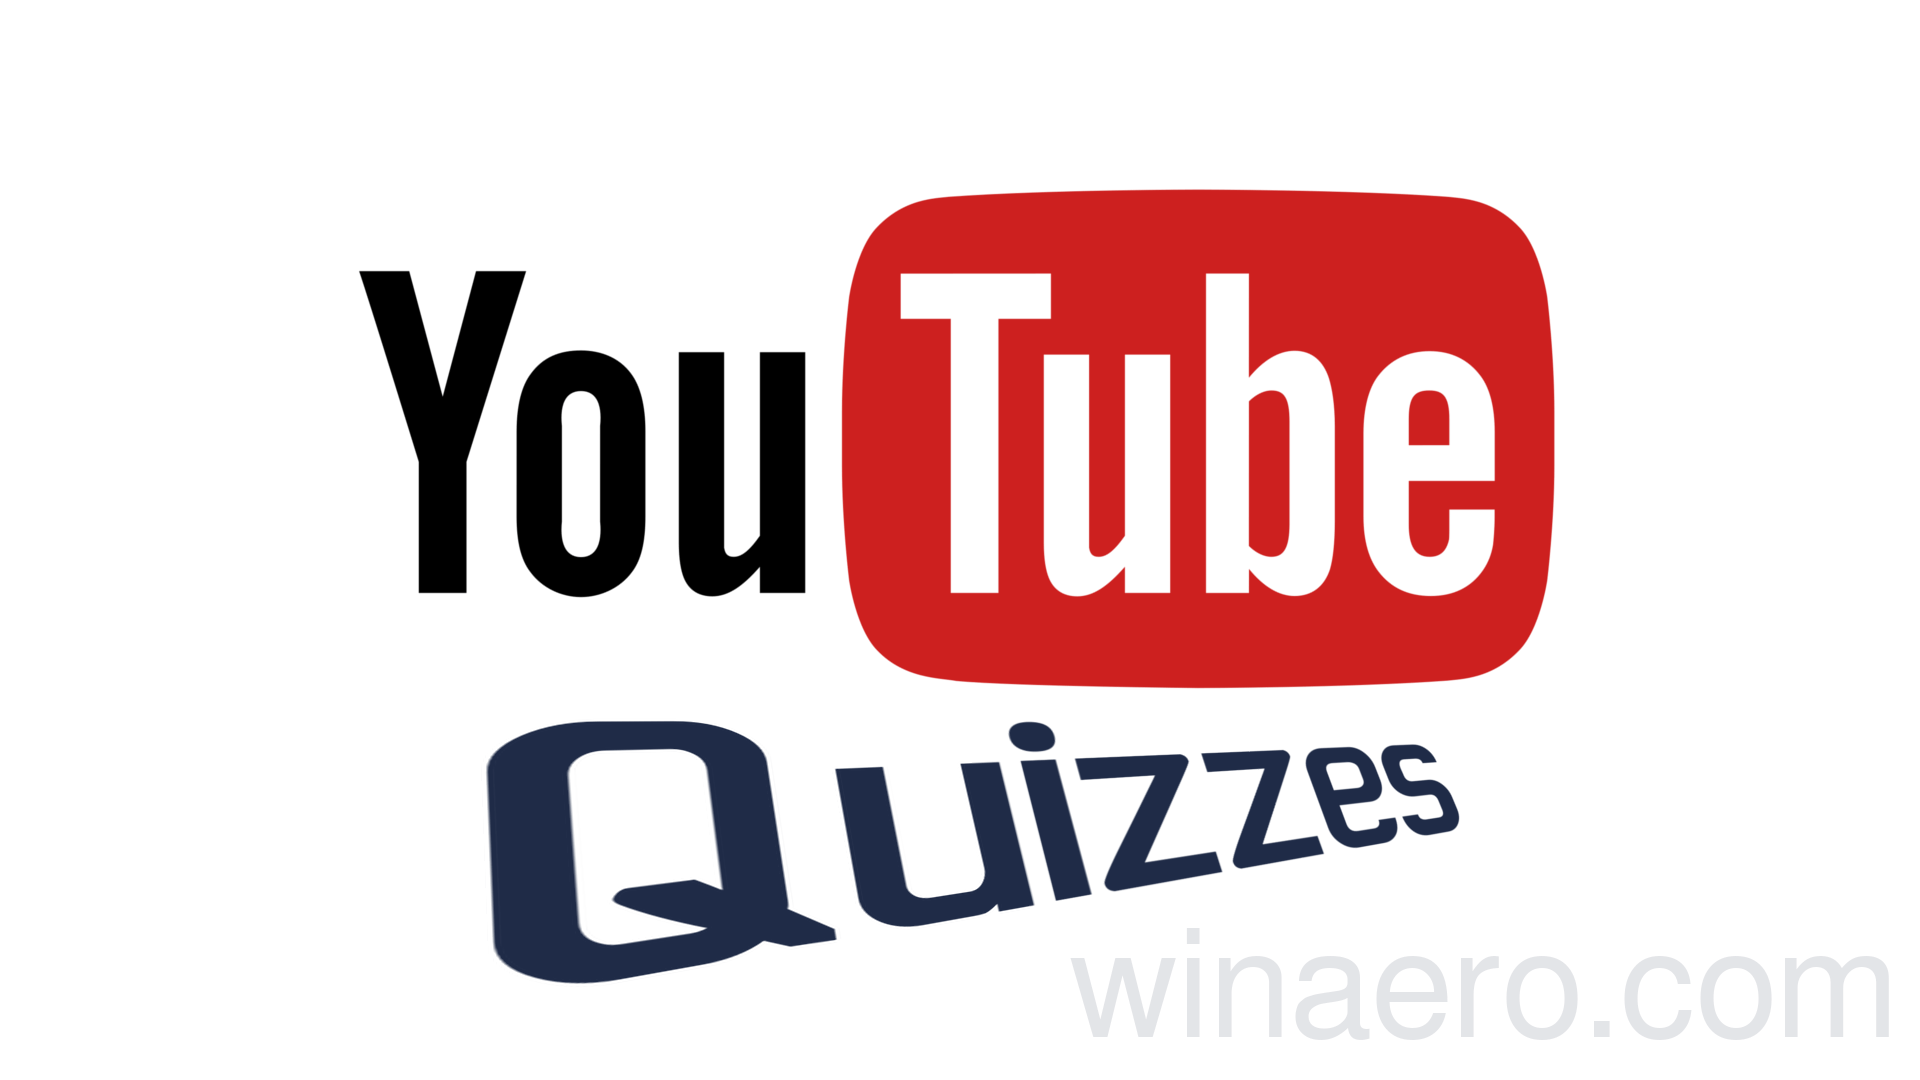 YouTube Quizzes